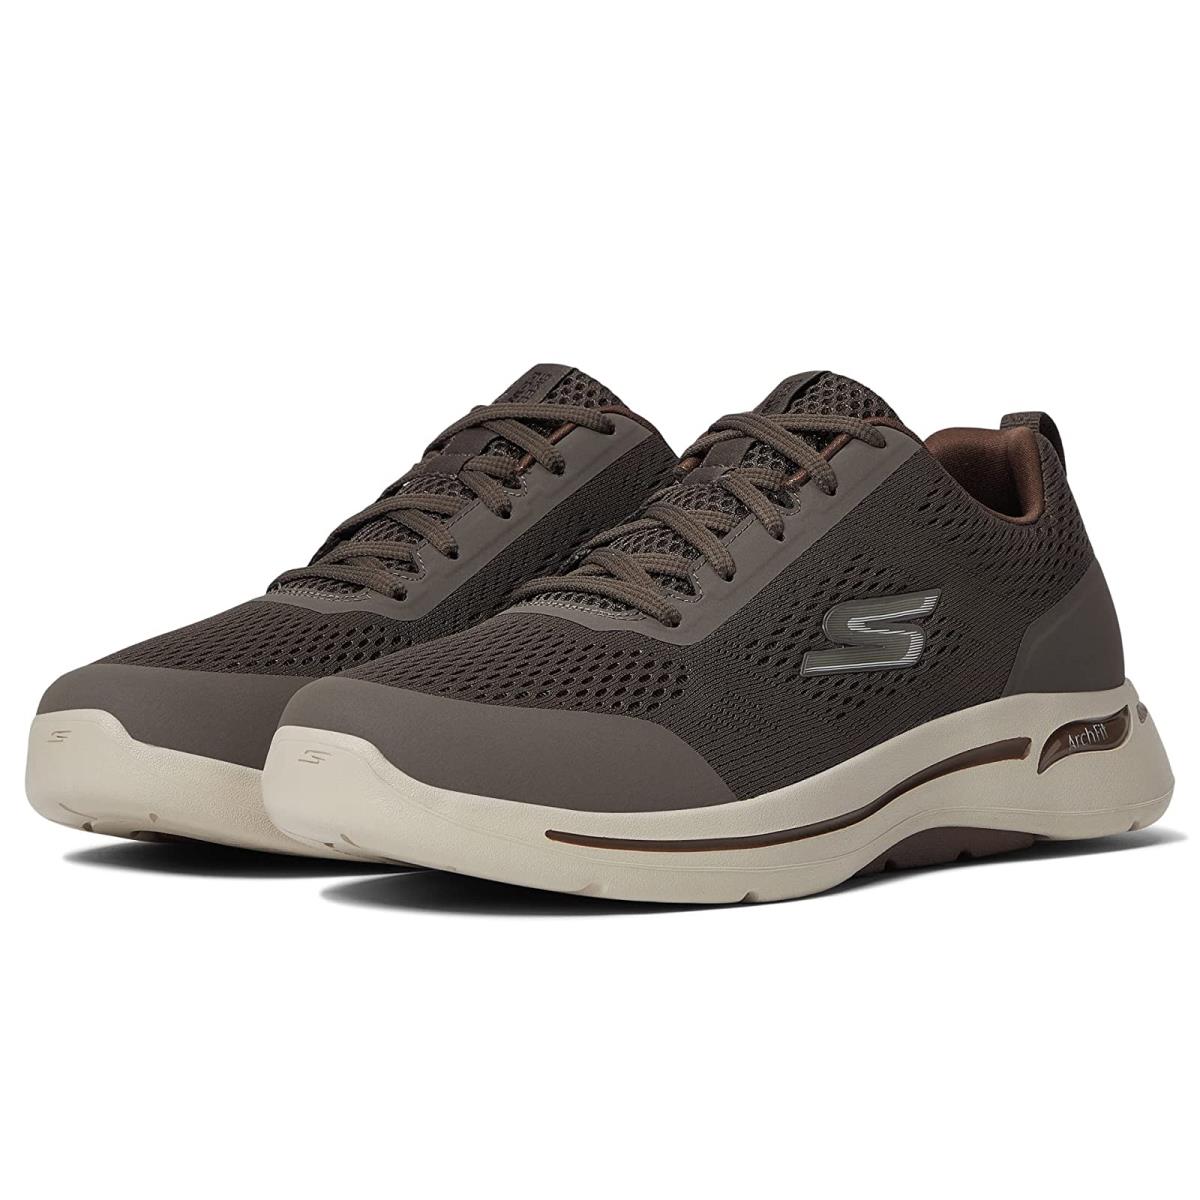 Man`s Shoes Skechers Performance Go Walk Arch Fit - Idyllic Taupe